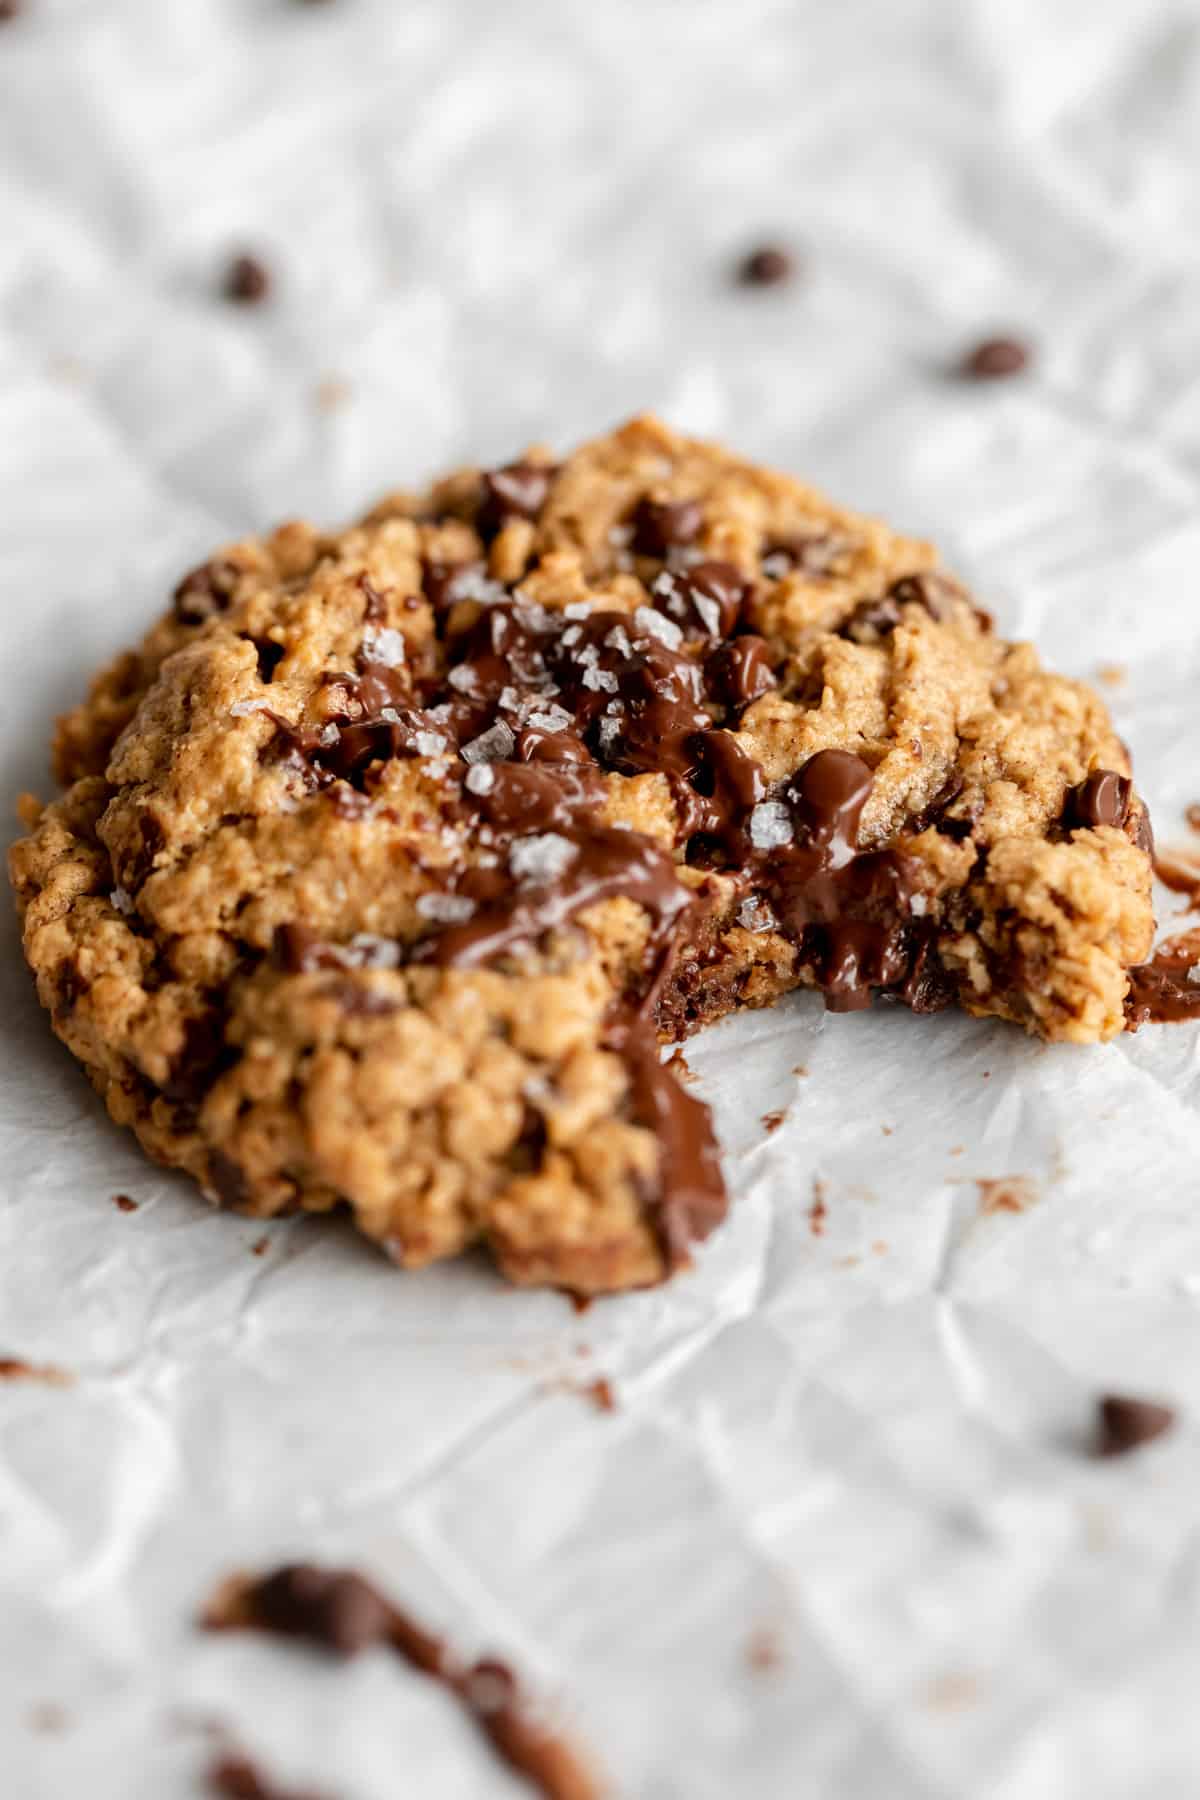 one bite taken out of the vegan gluten free oatmeal cookie with melted chocolate chips